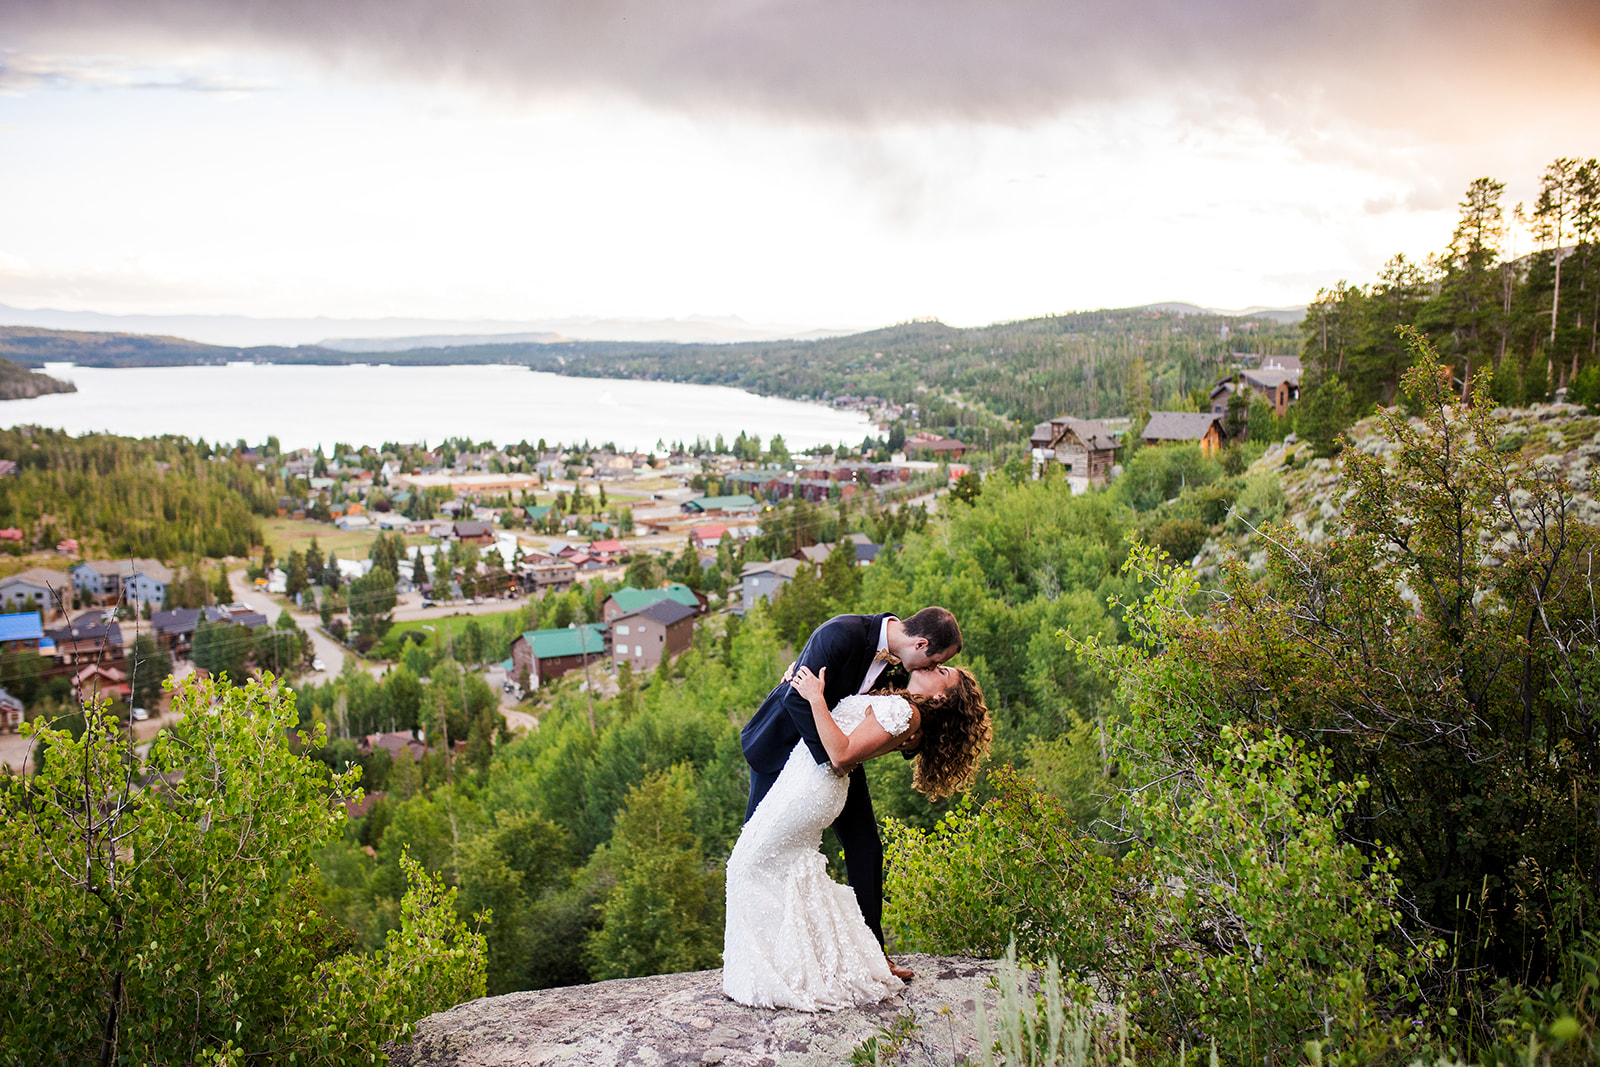 Groom dips bride for a kiss at golden hour with views of Grand Lake in the background.